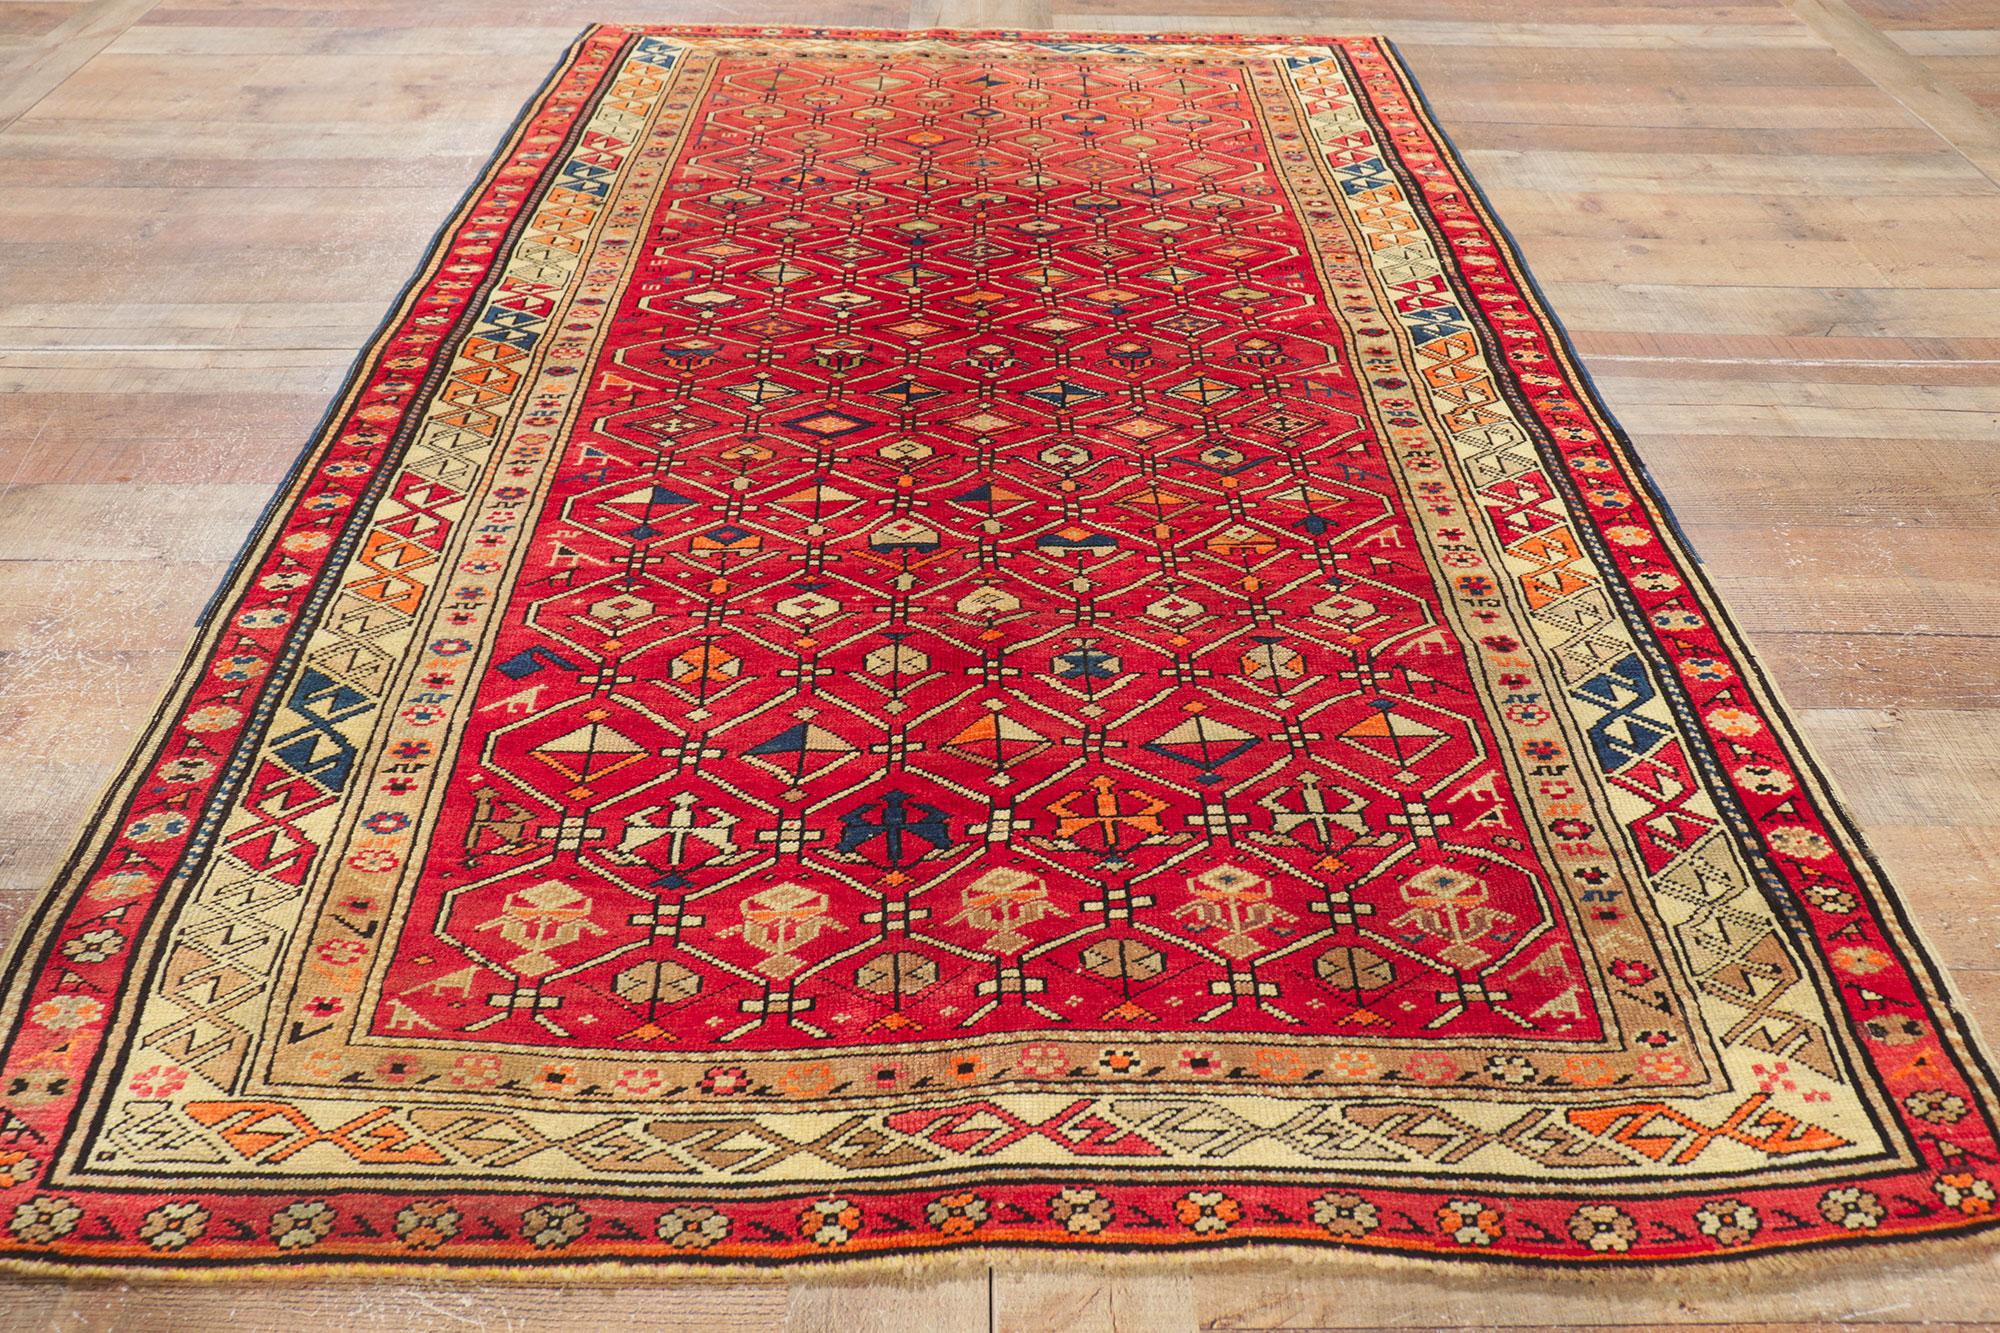 Vintage Turkish Tribal Oushak Rug with Vibrant Earth-Tone Colors For Sale 2